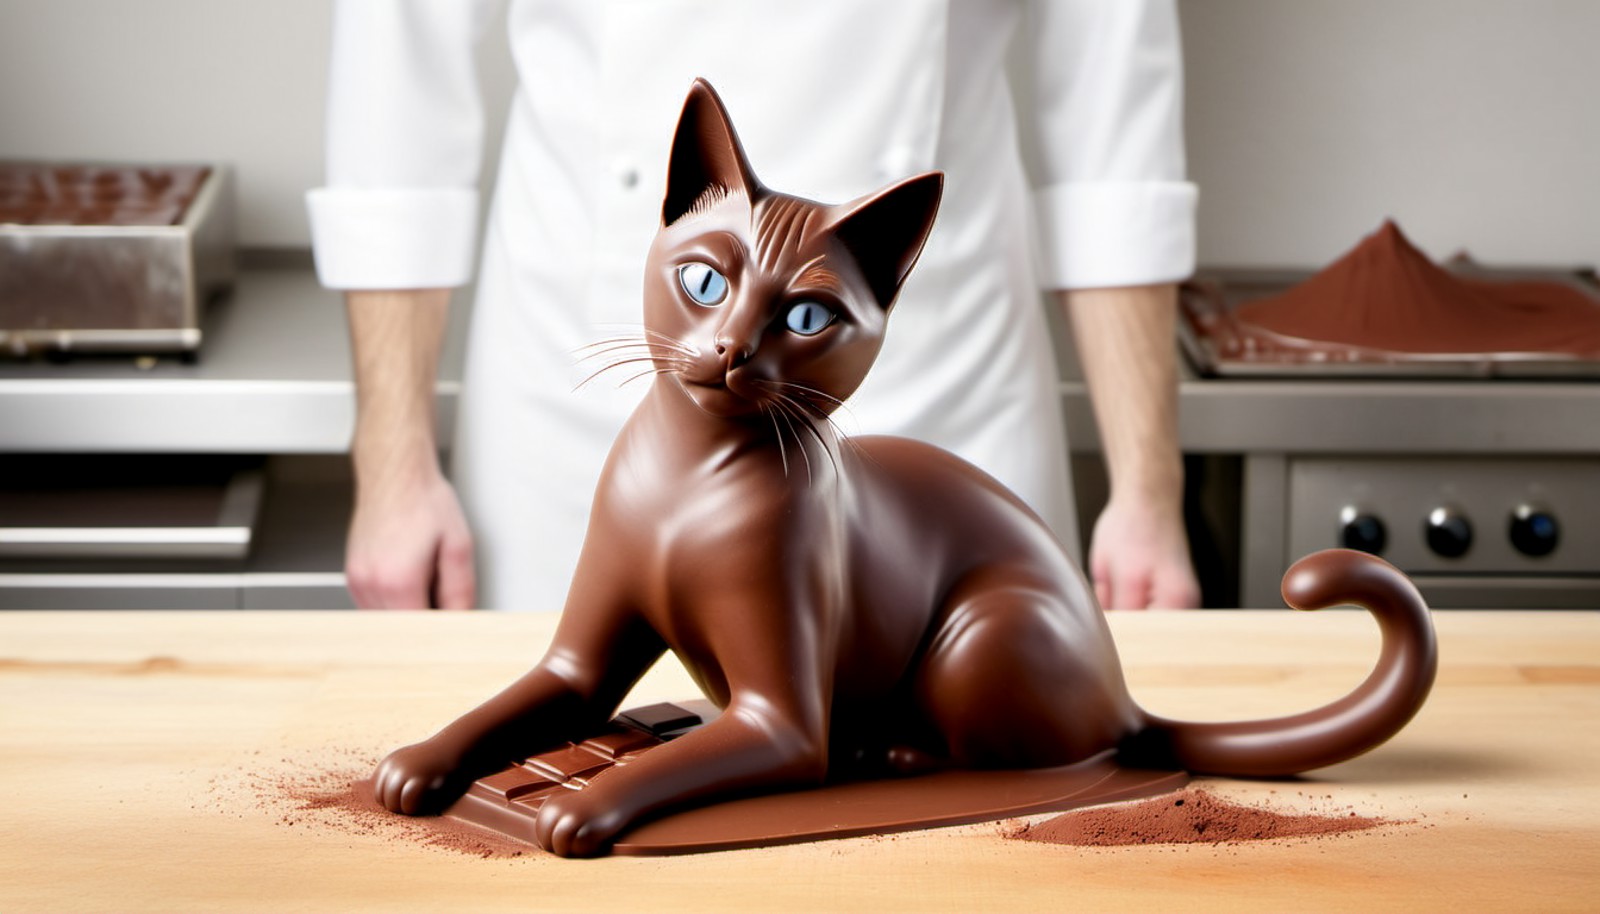 ChocolateRay, Siamese Cat, Abrasive, wearing made entirely of chocolate, at Midday, Low shutter, Colorless